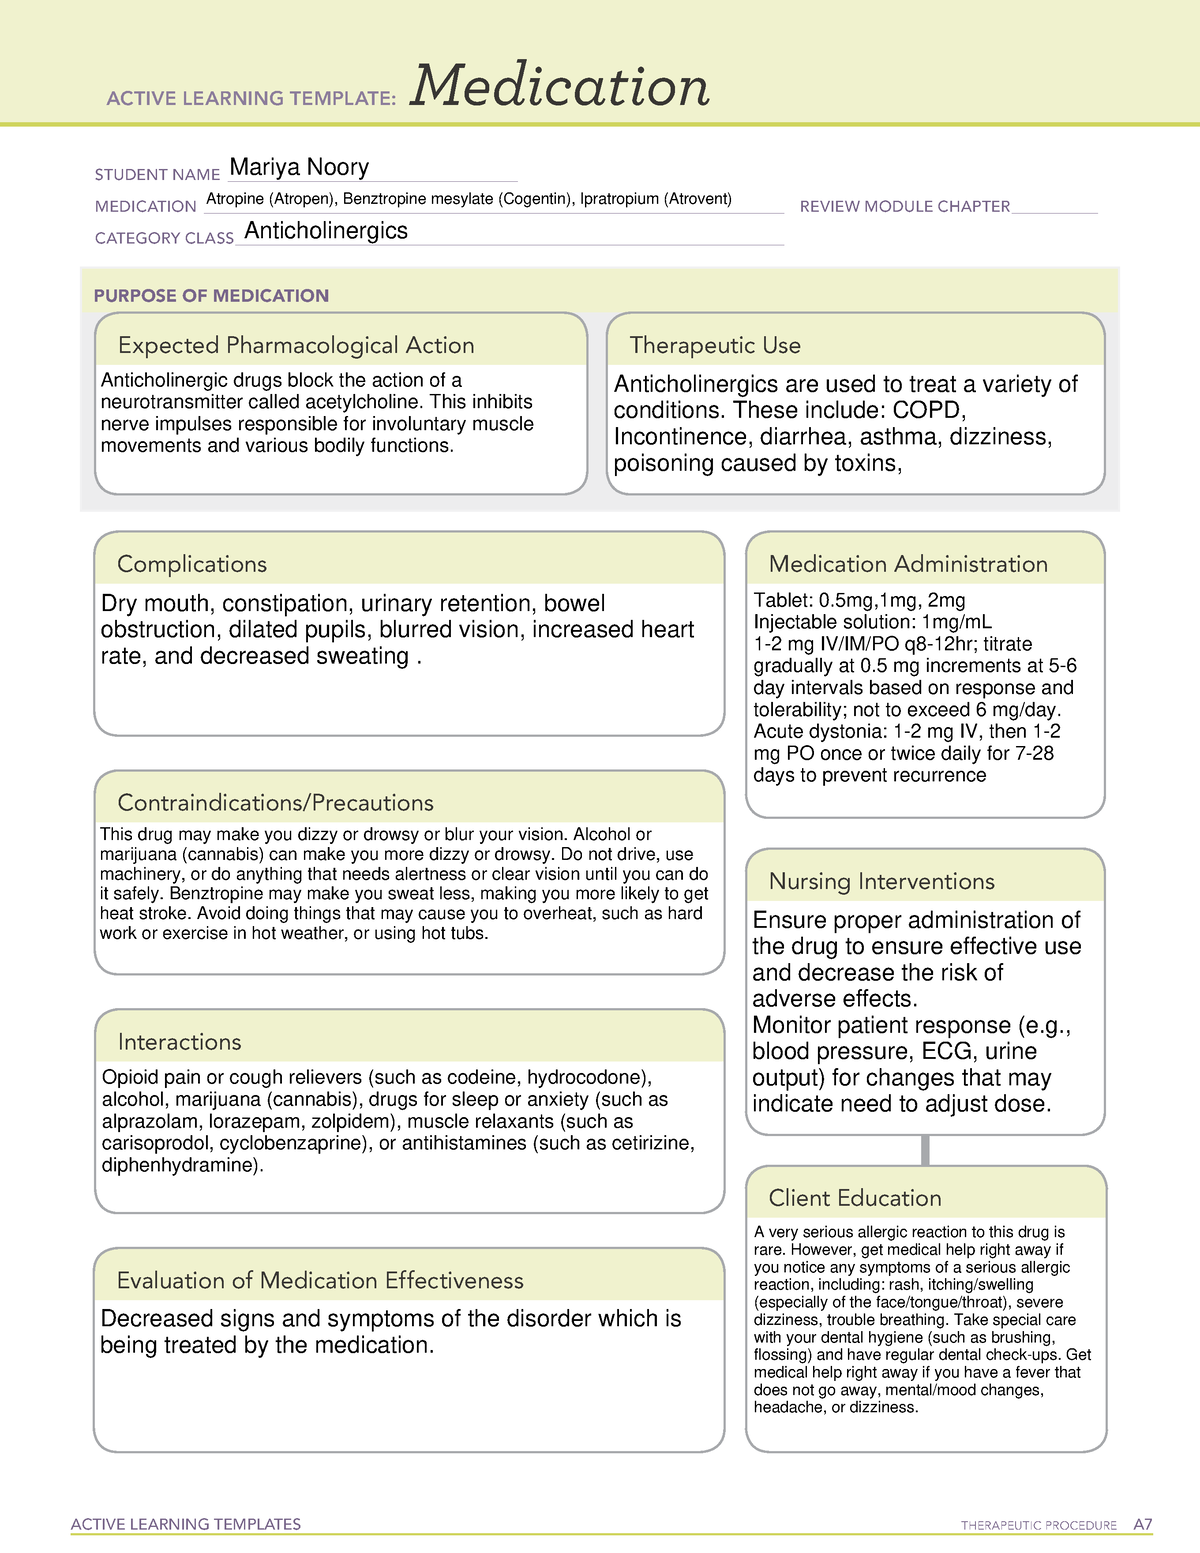 active-learning-template-medication-anticholinergics-active-learning-templates-therapeutic